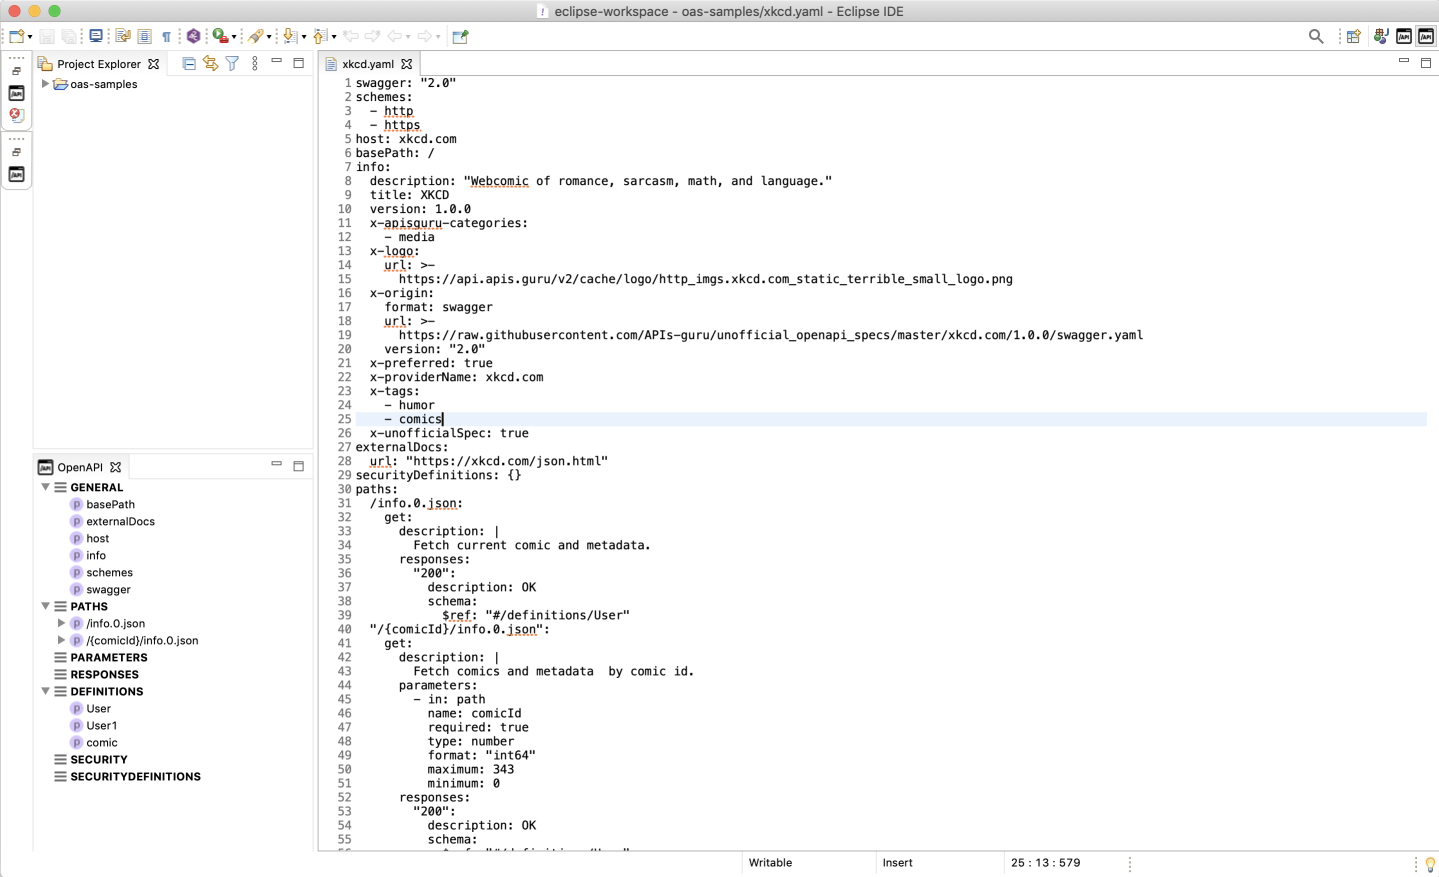 An example screenshot of the OpenAPI extension in Eclipse.